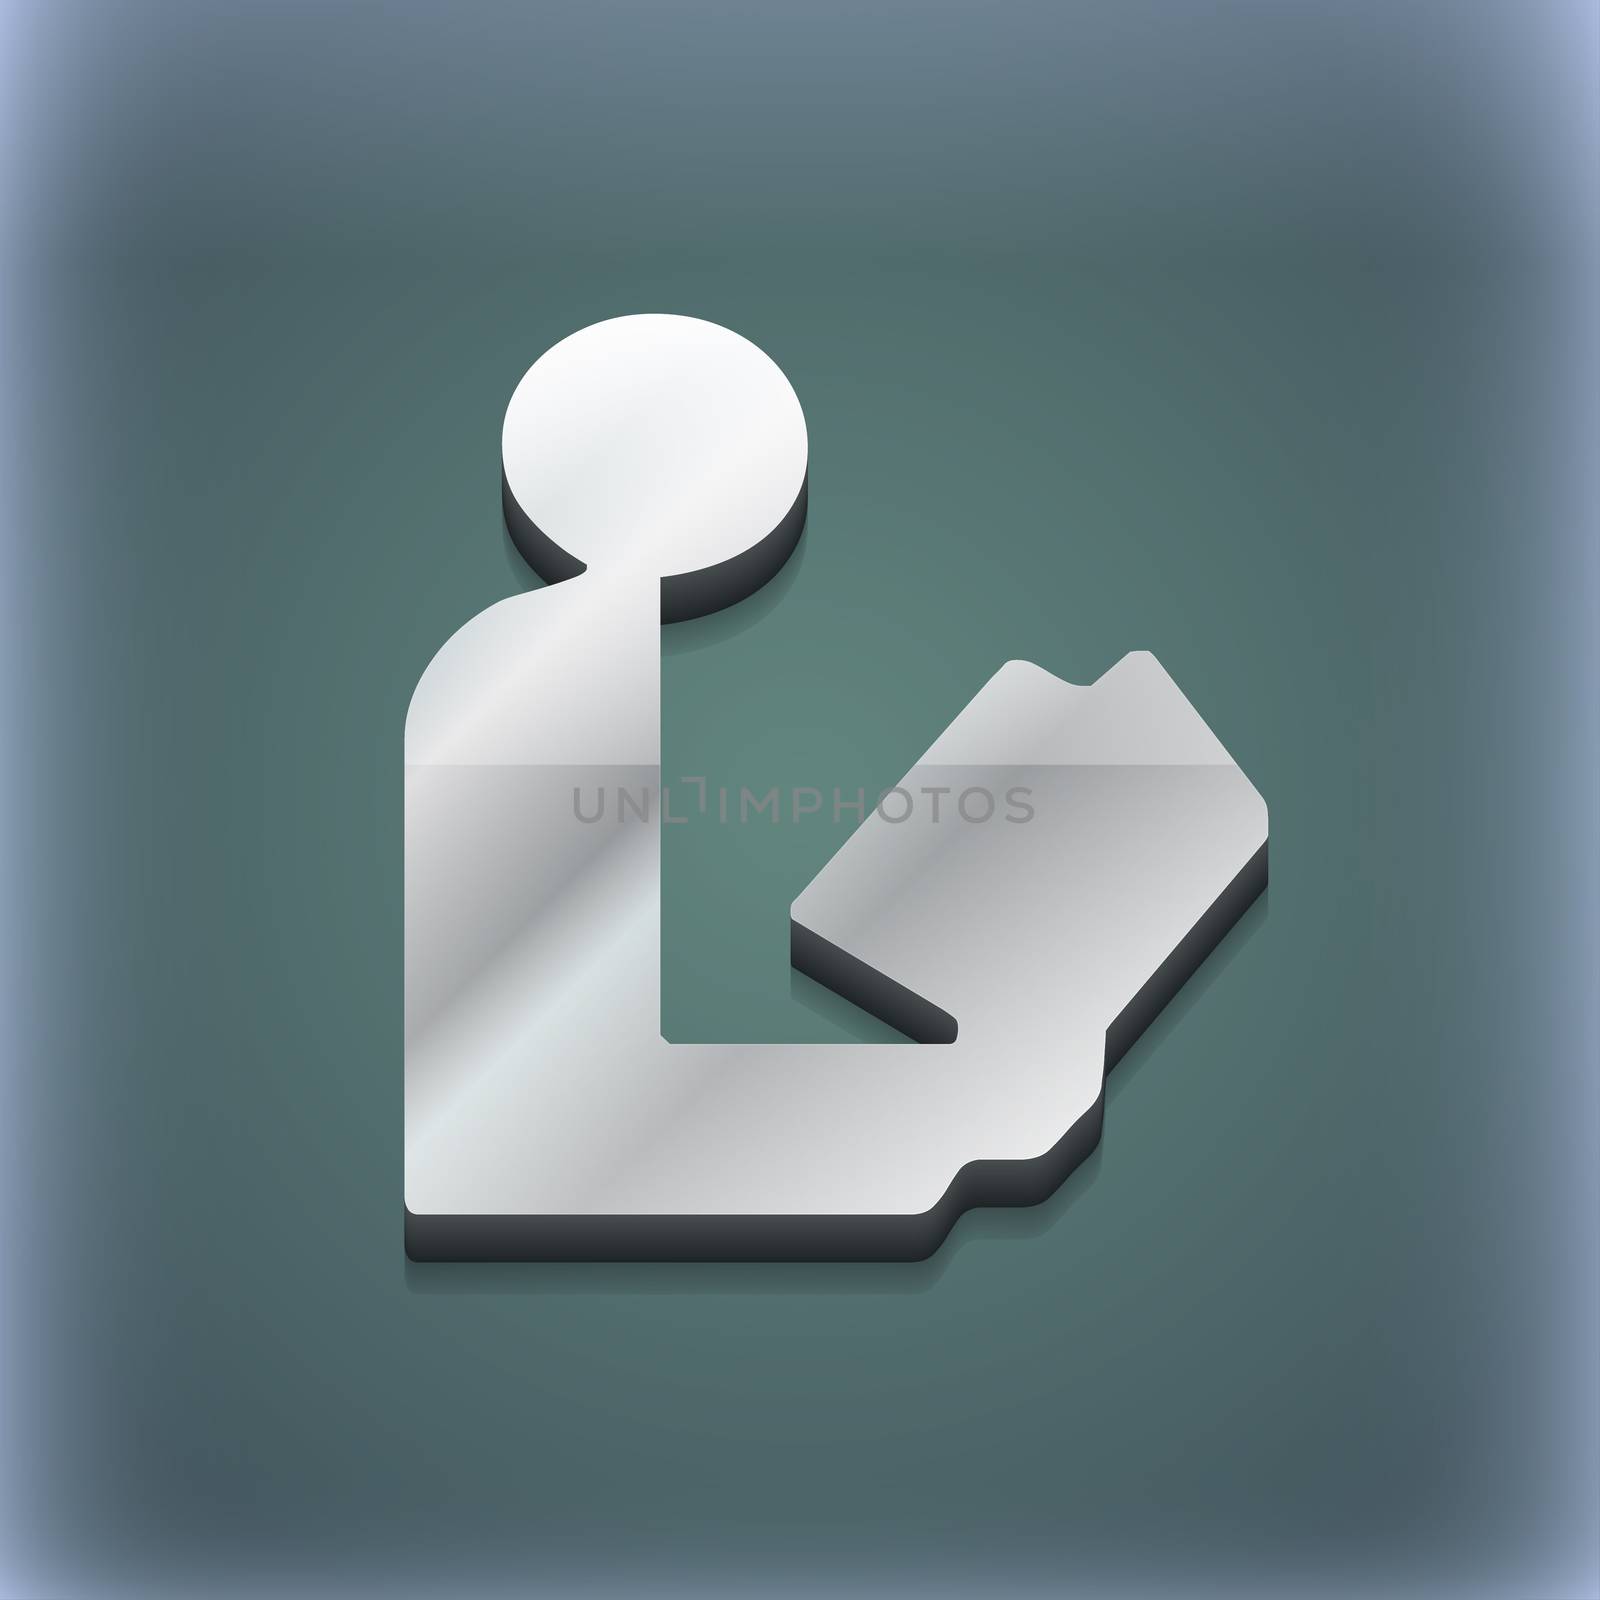 read a book icon symbol. 3D style. Trendy, modern design with space for your text illustration. Raster version